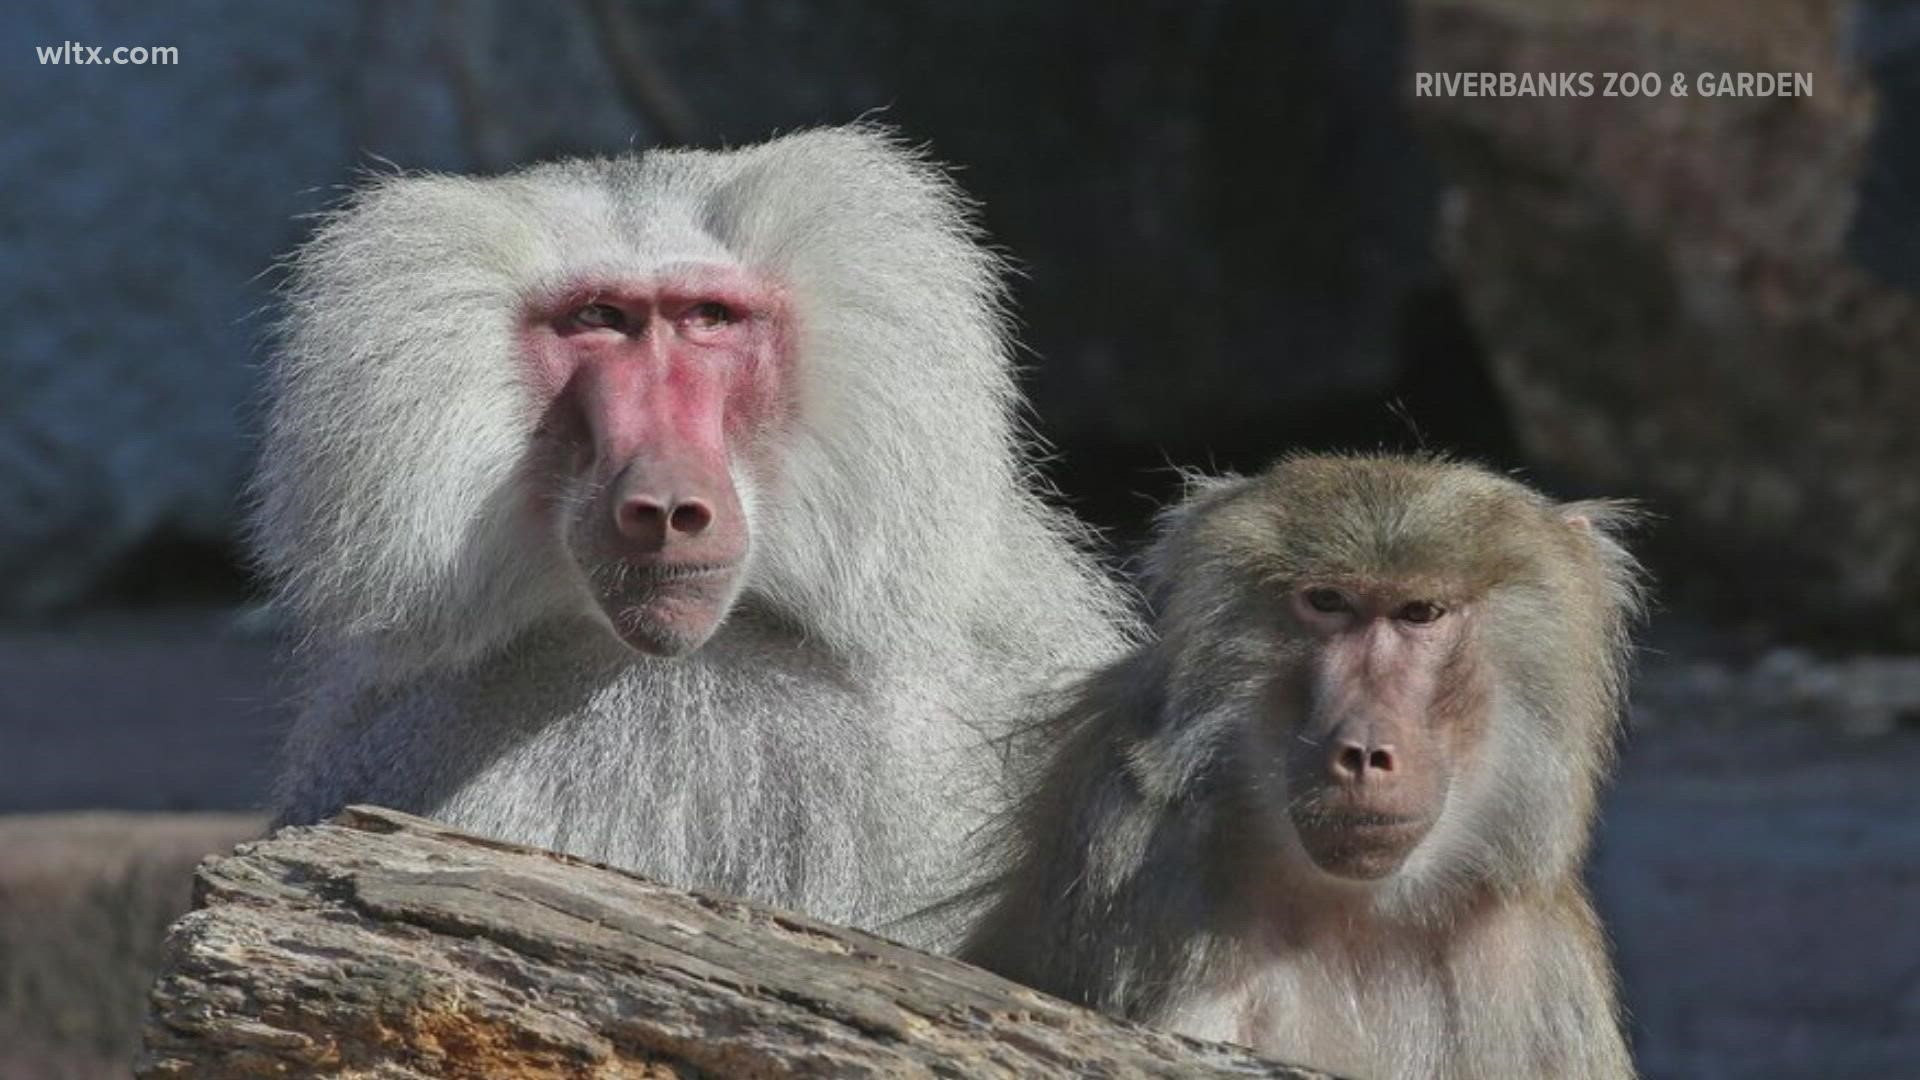 Bubba, a 31-year-old Hamadryas baboon, had been at Riverbanks Zoo for 12 years.